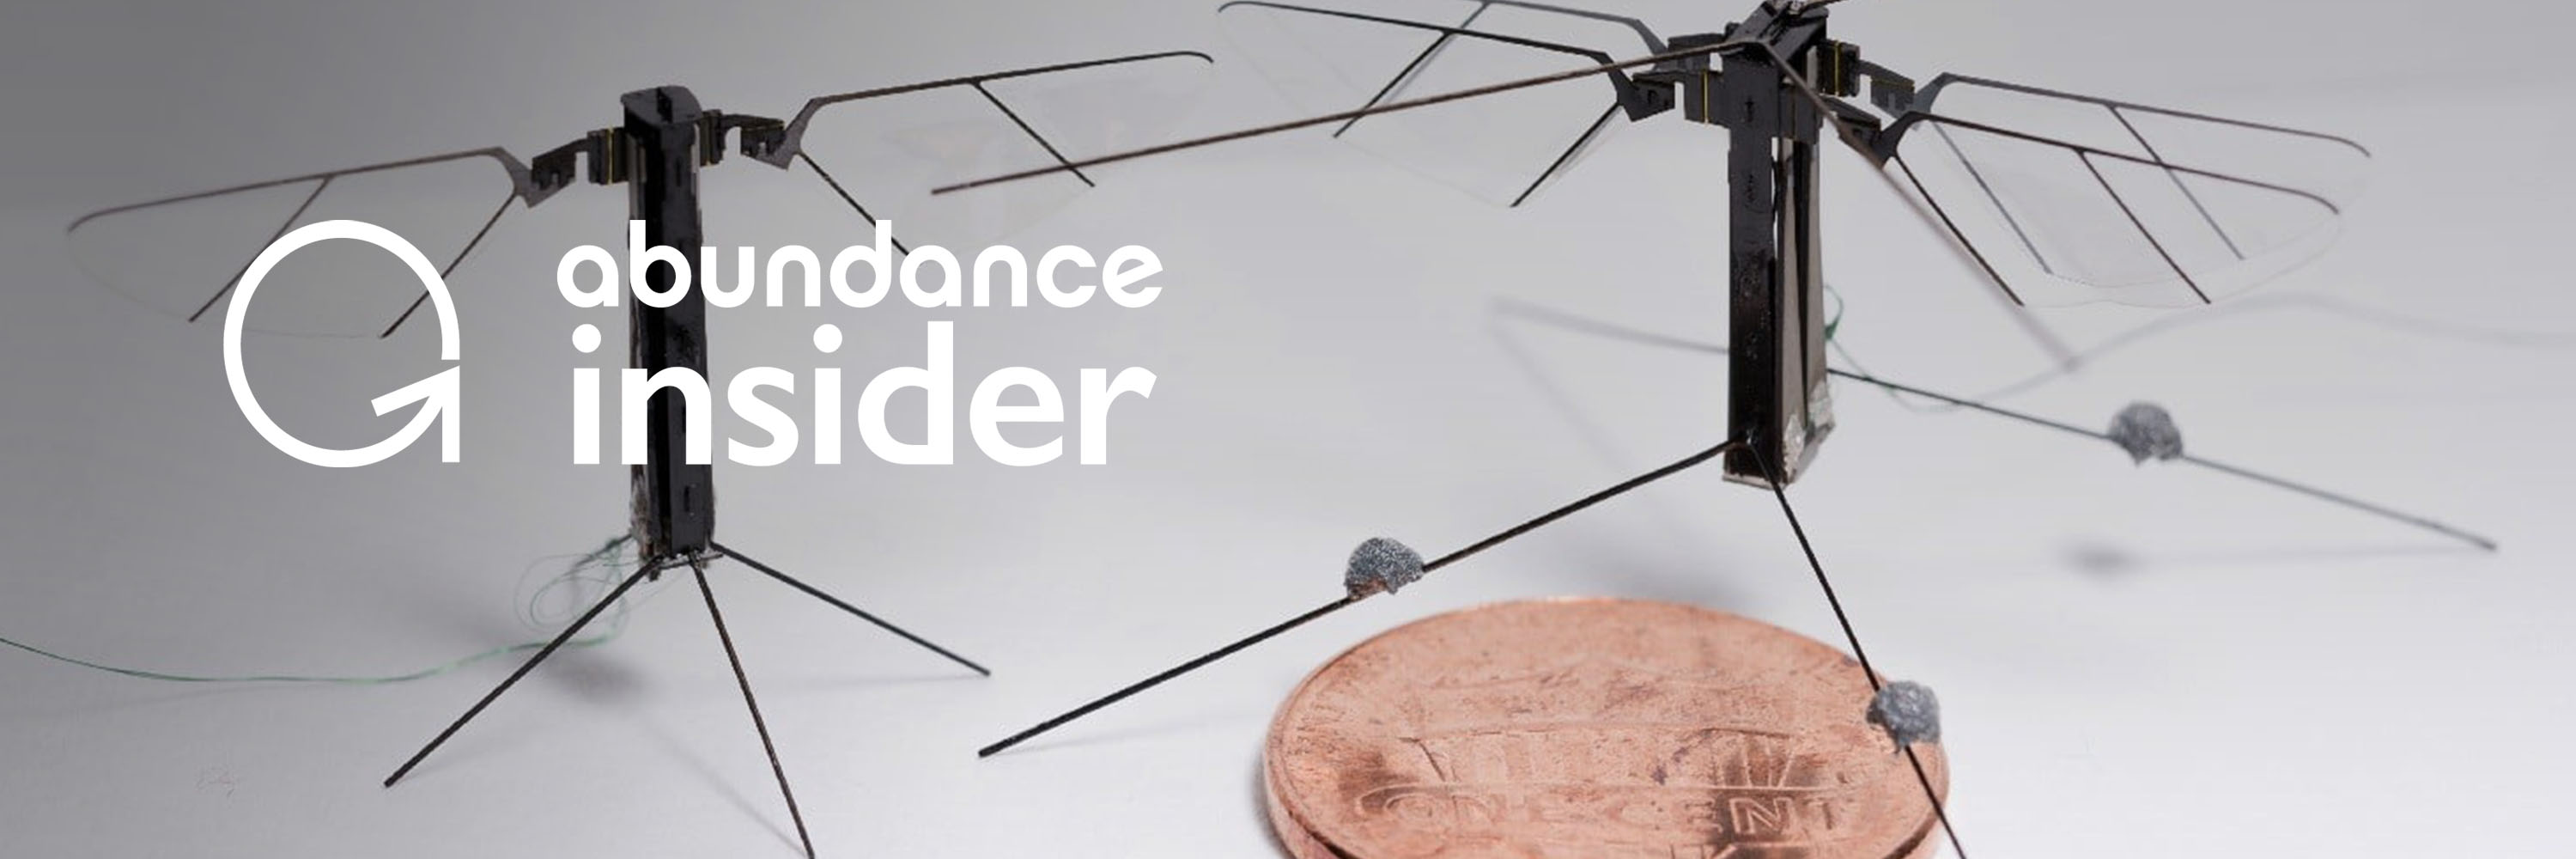 Penny-Sized Robotic Bee Is The Most Sci-Fi Thing You'll See All Week